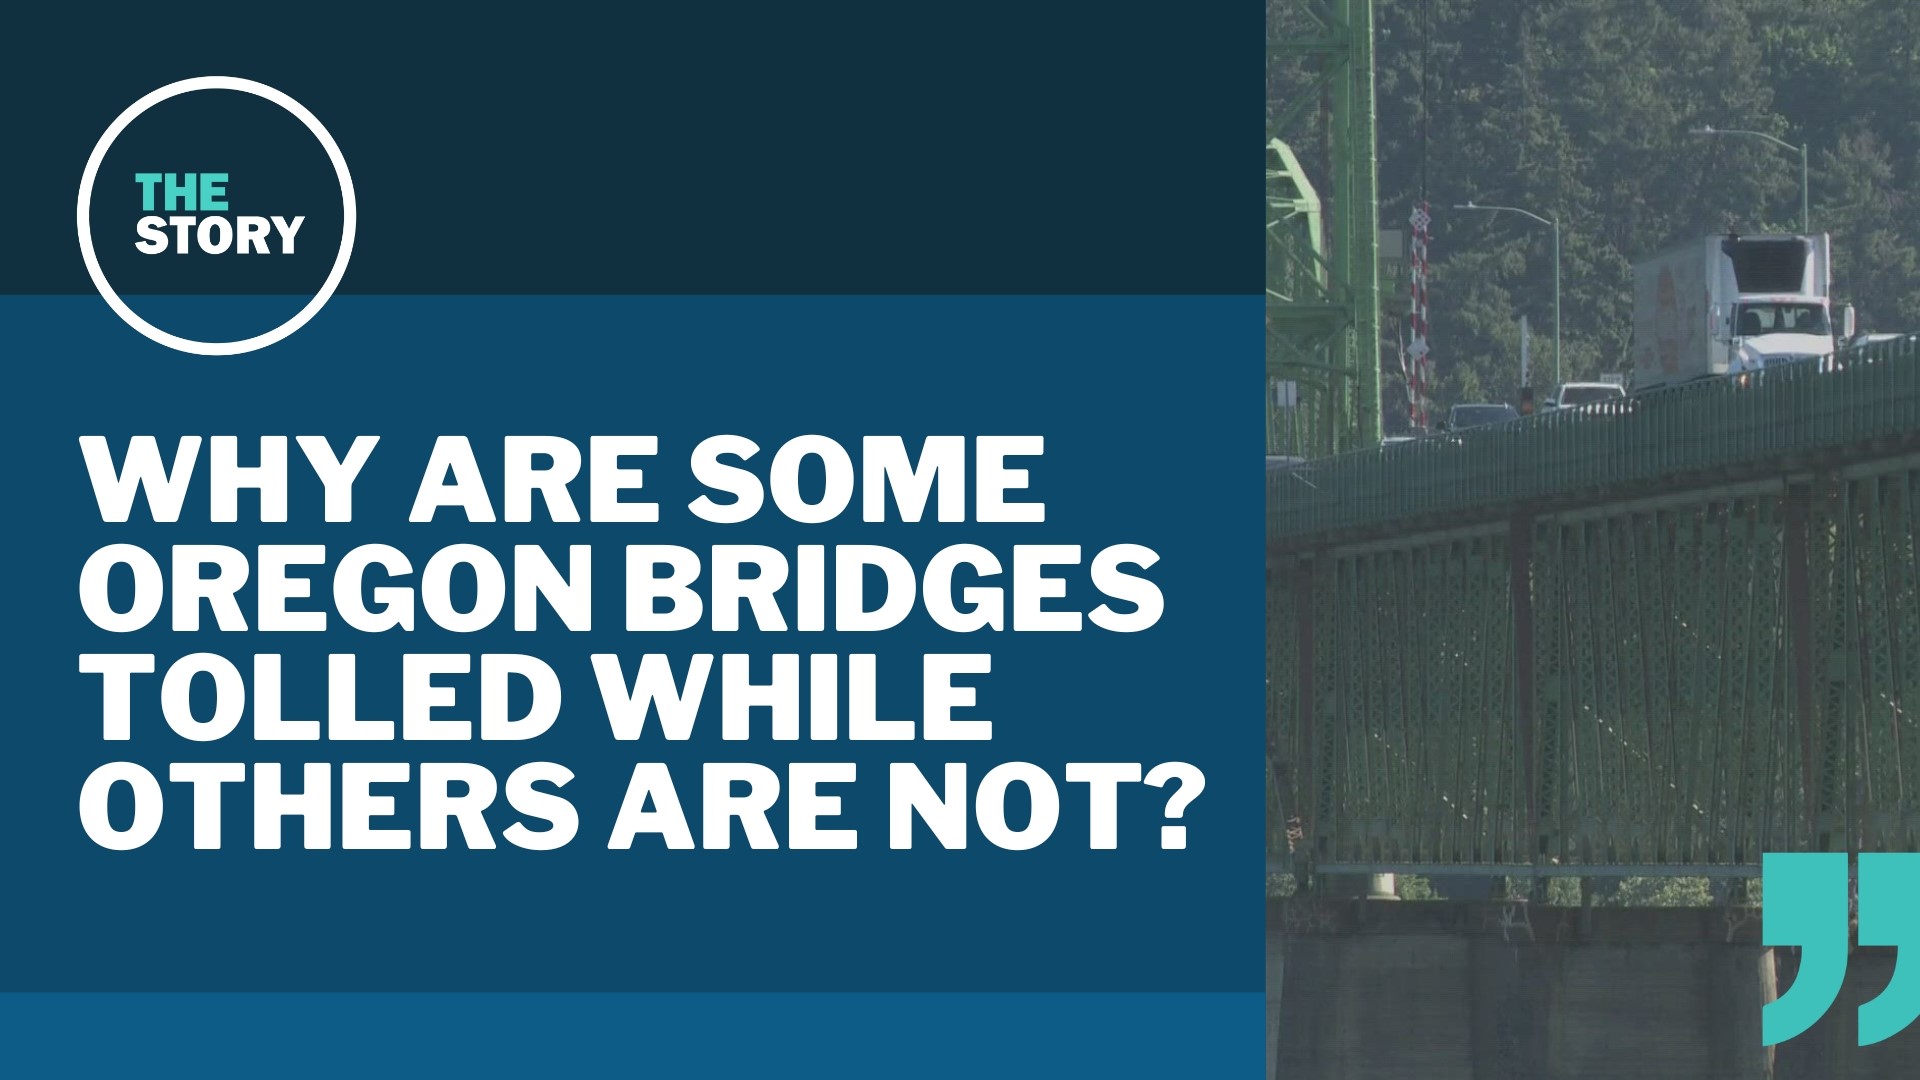 Most Oregon bridges were only tolled in their early years to pay off construction costs. But a couple oddballs are tolled in perpetuity. Why the difference?